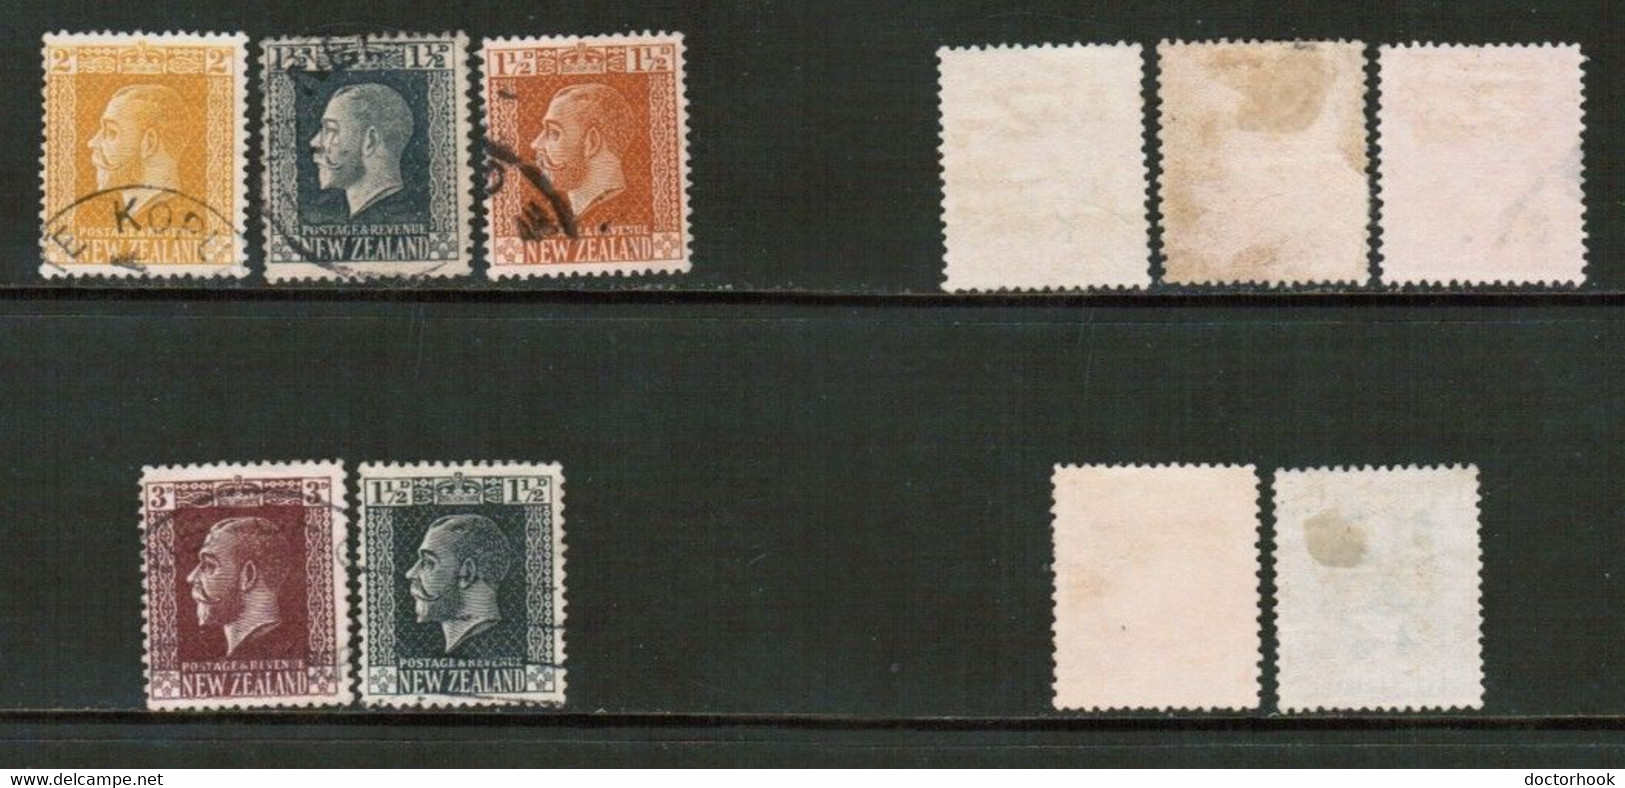 NEW ZEALAND   Scott # 160-4 USED (CONDITION AS PER SCAN) (WW-1-64) - Usados